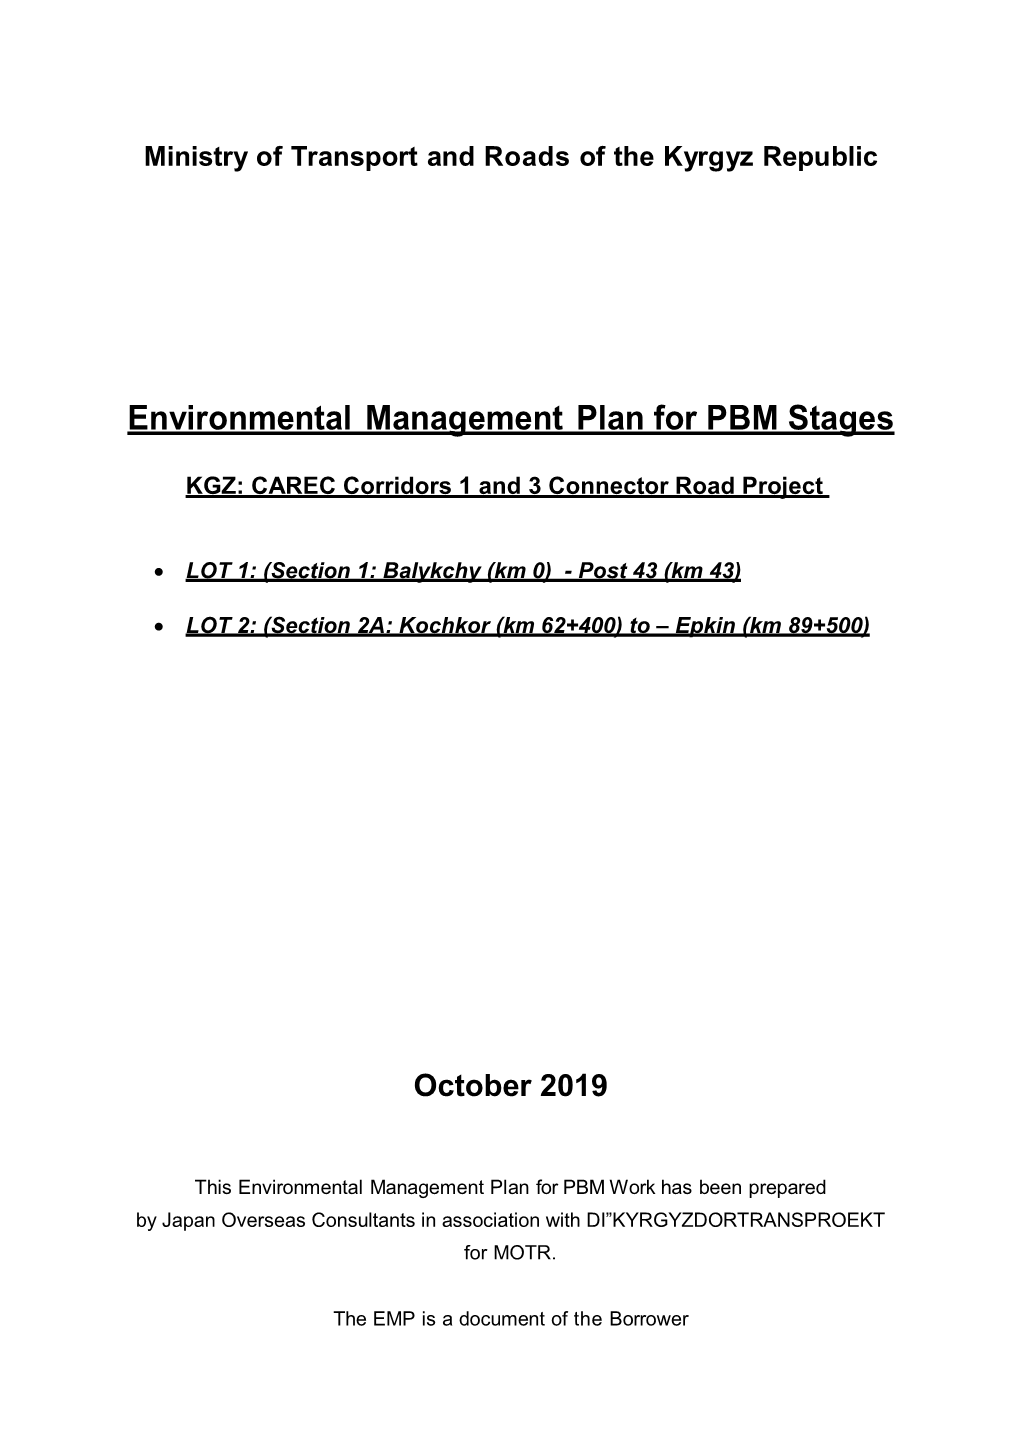 Environmental Management Plan for PBM Stages